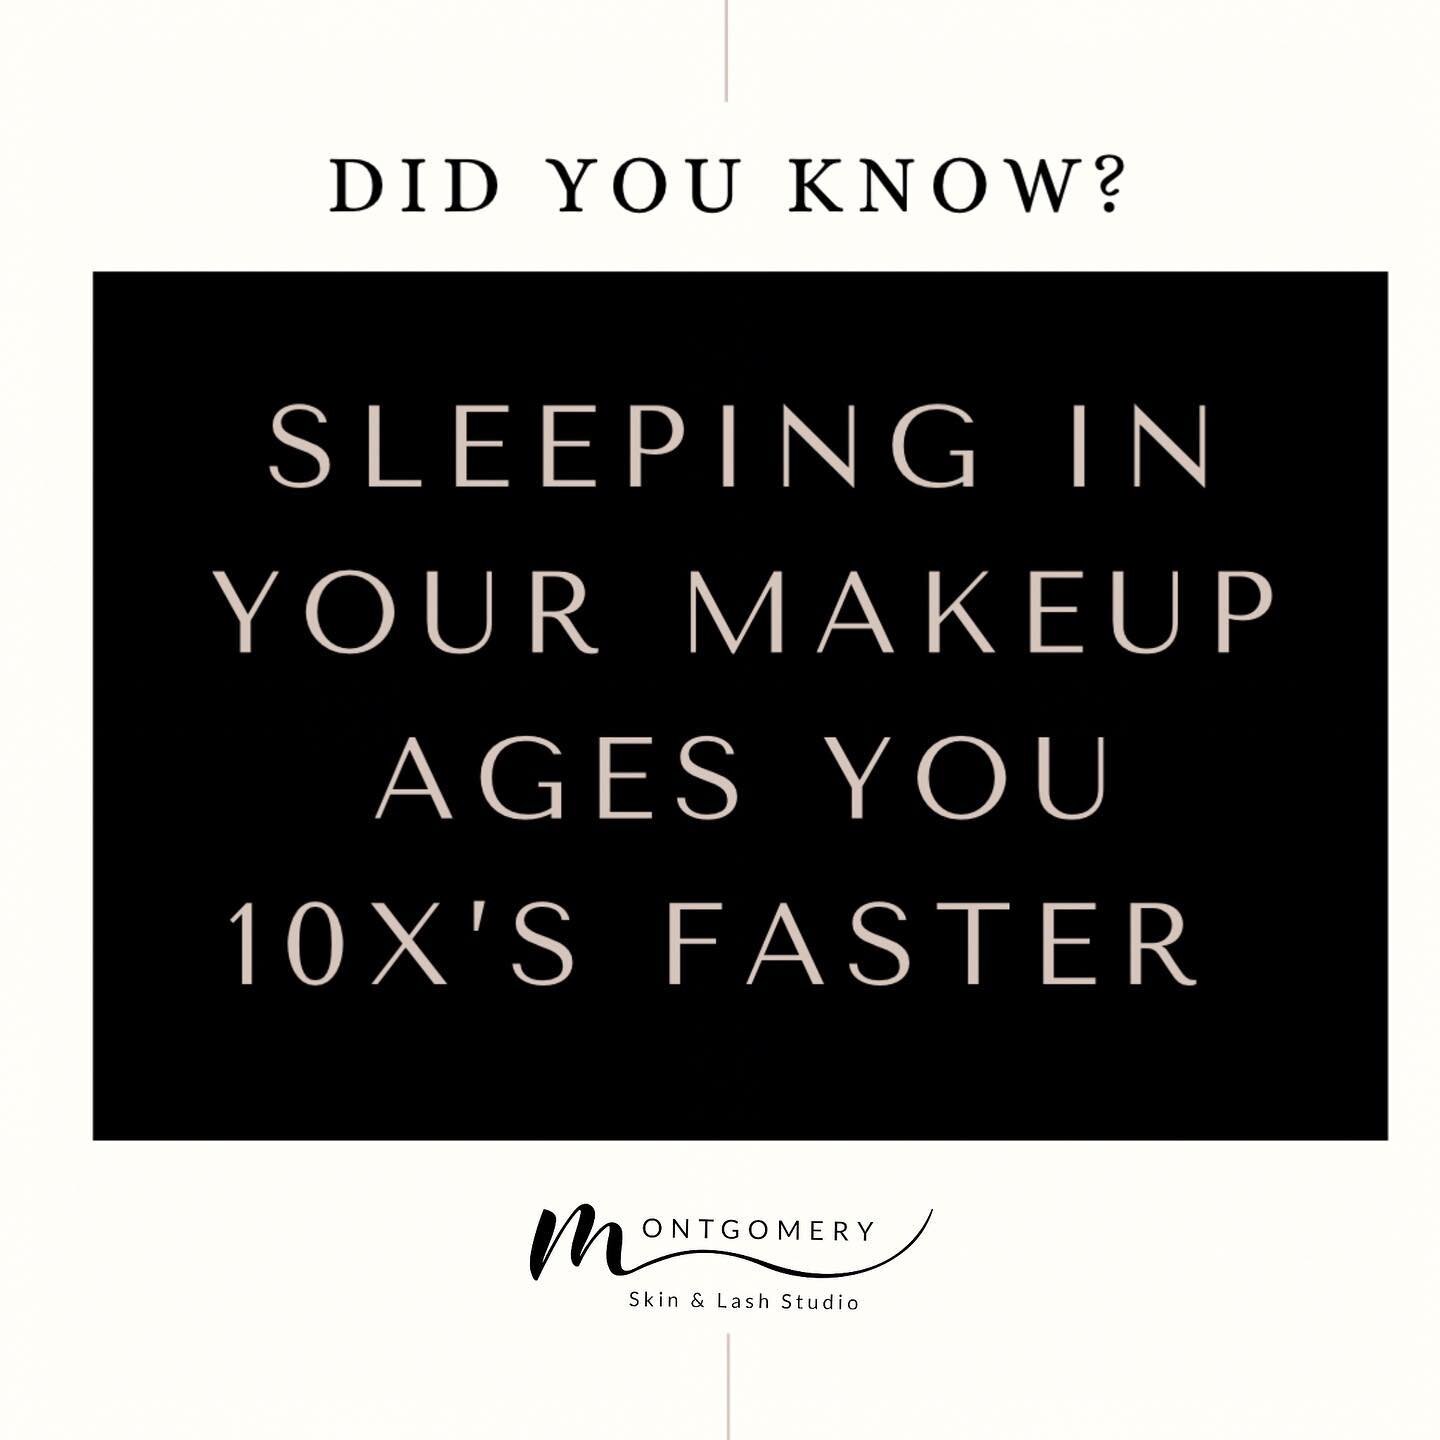 It&rsquo;s not called beauty rest if you don&rsquo;t wash your face before you go to sleep! 

Makeup traps dirt and environmental pollutants inside the skin, and this type of environmental stress can result in increased free radicals which can cause 